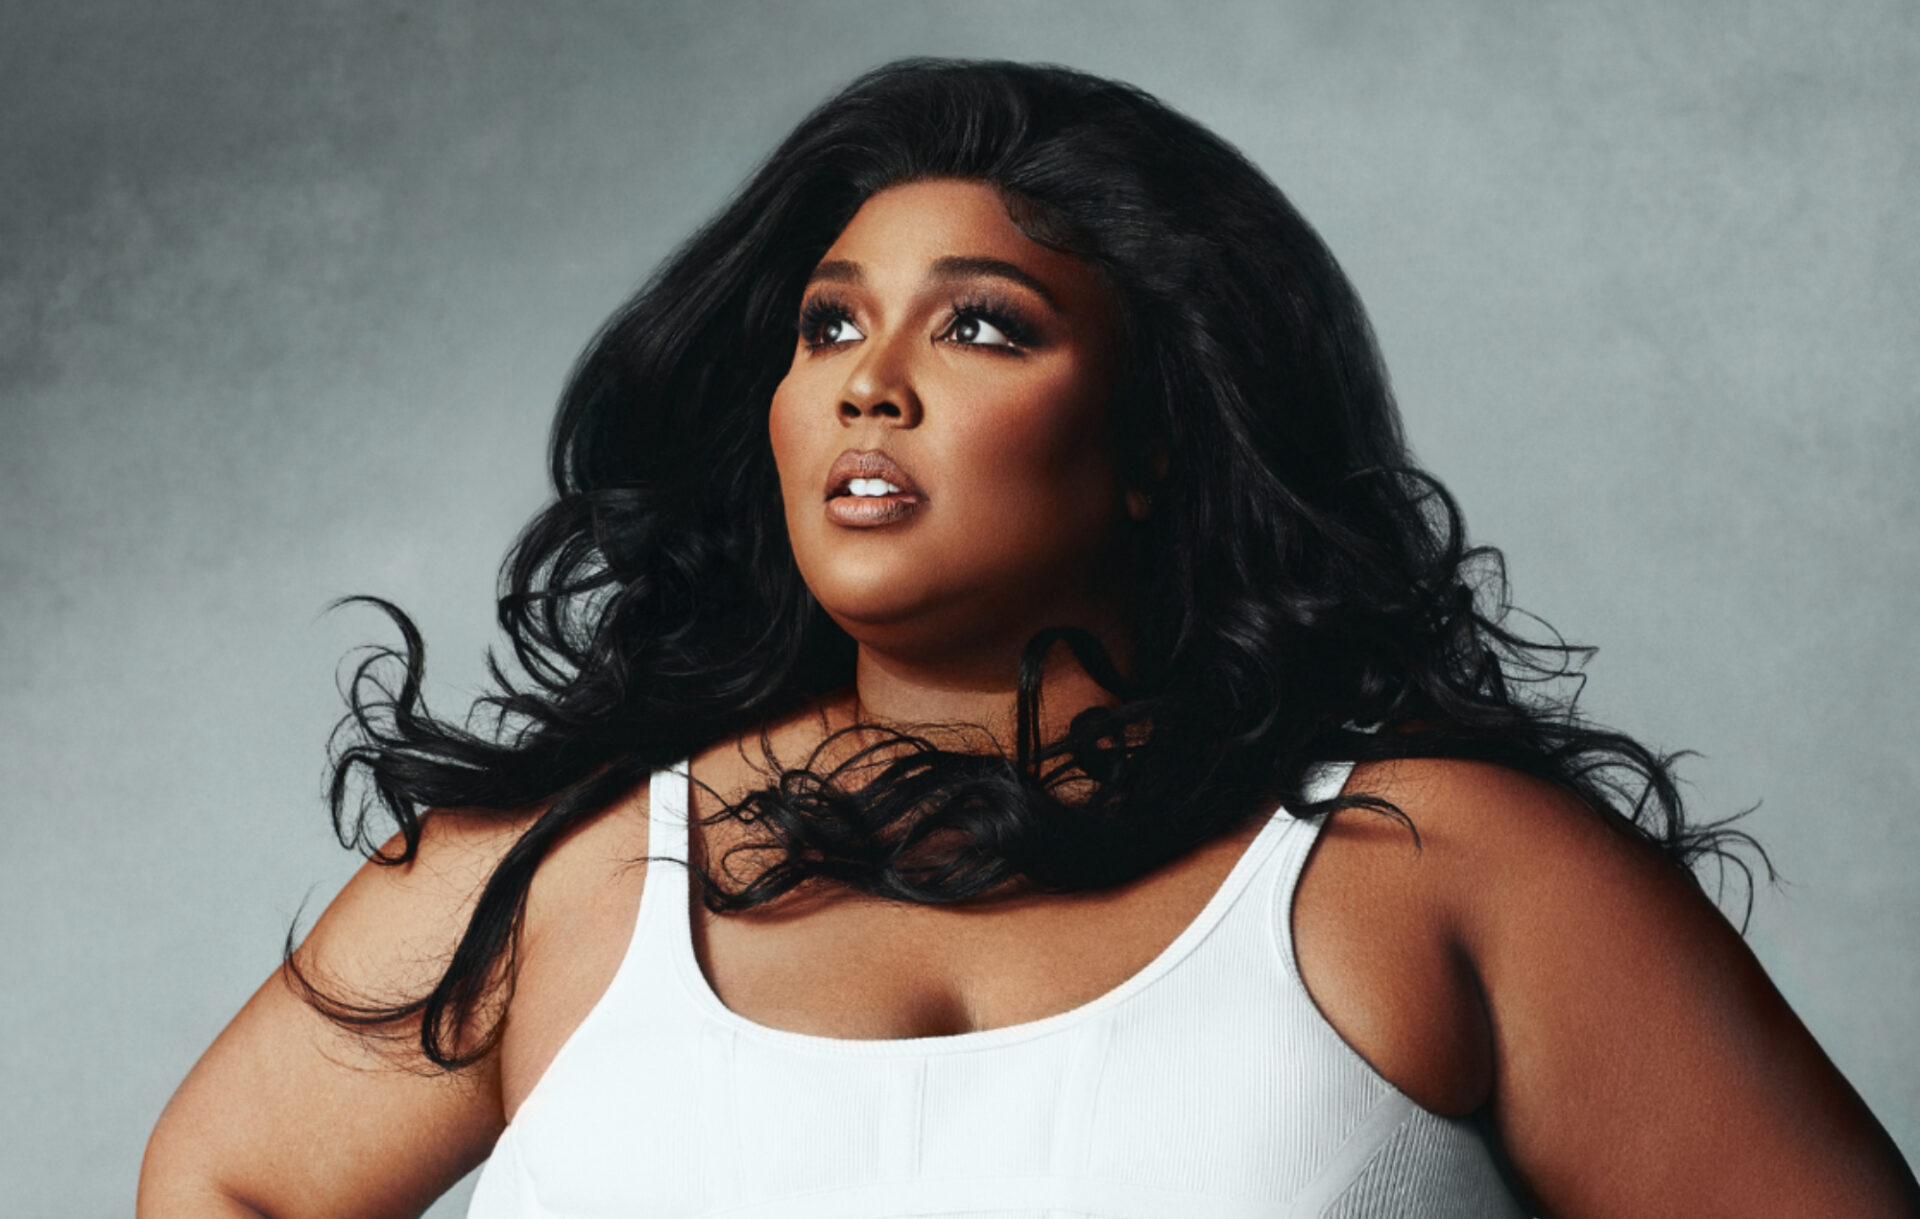 Lizzo Can Register '100% That Bitch' Trademark for Clothing Line